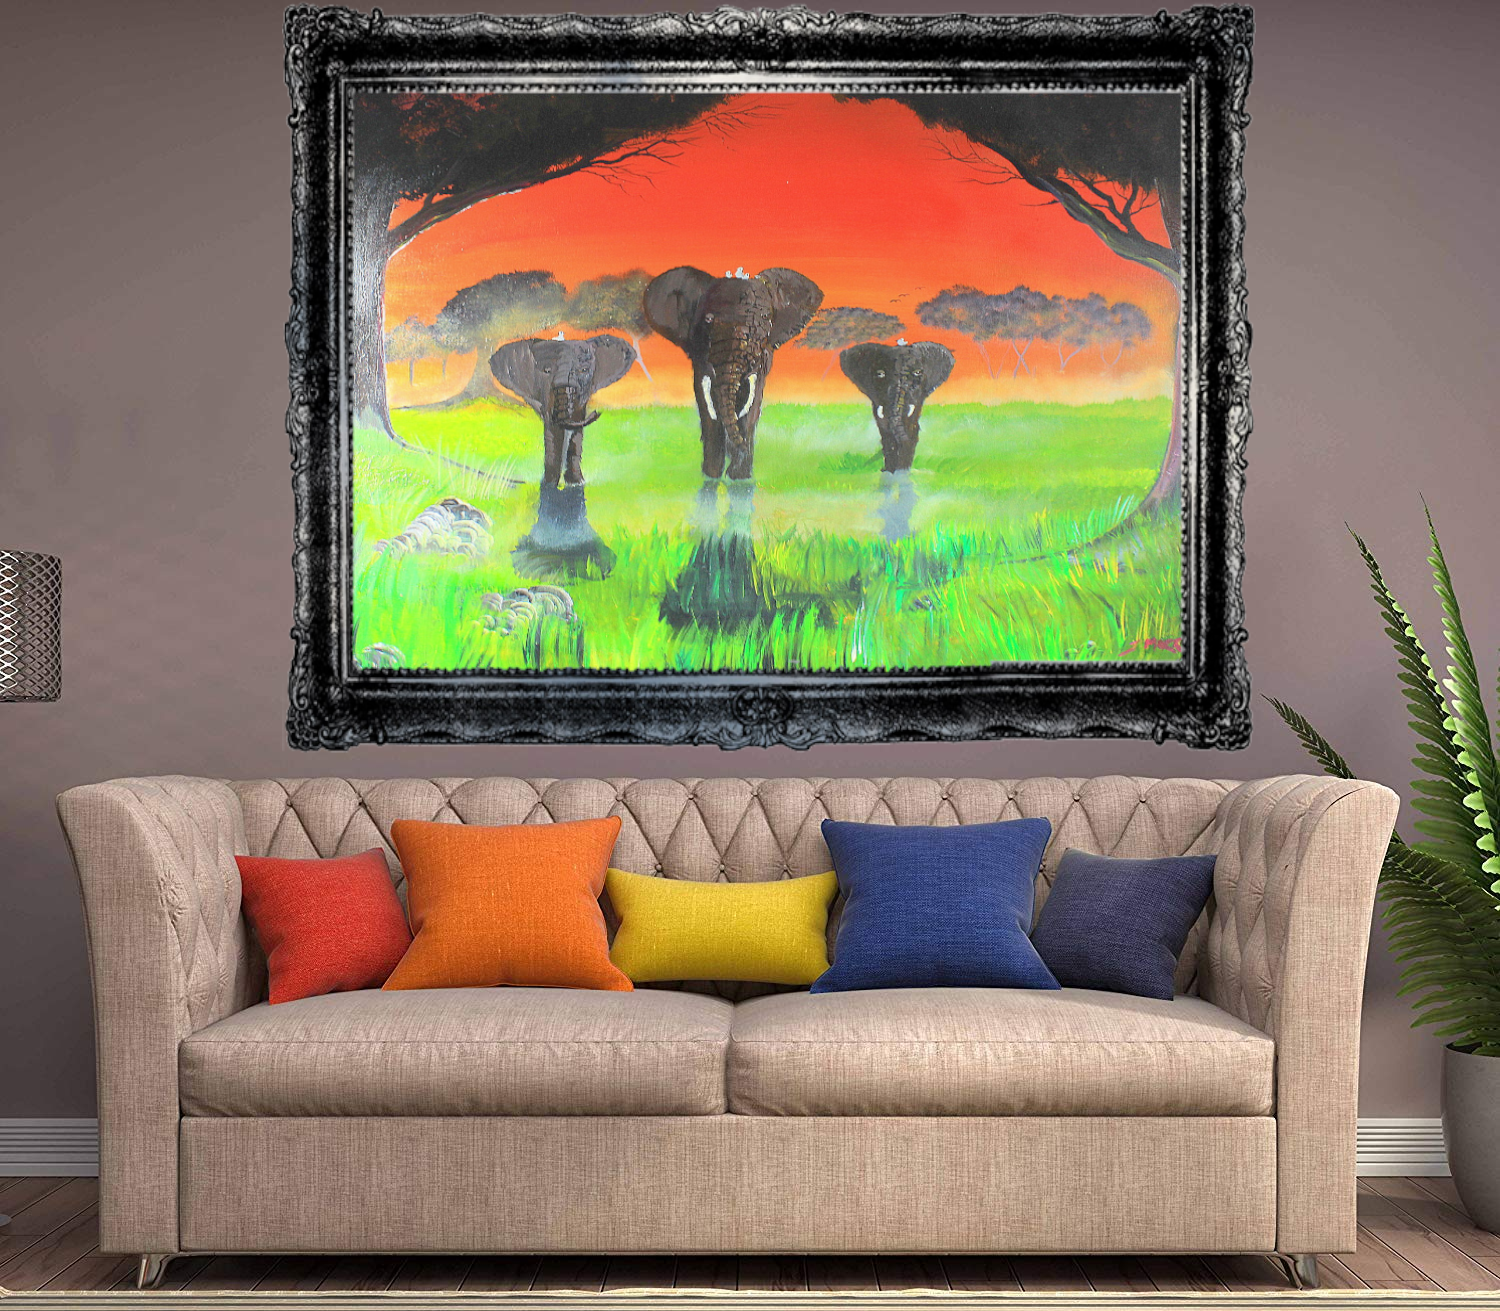 Elephants at sunset painting ~ Elephants in the mist Original painting